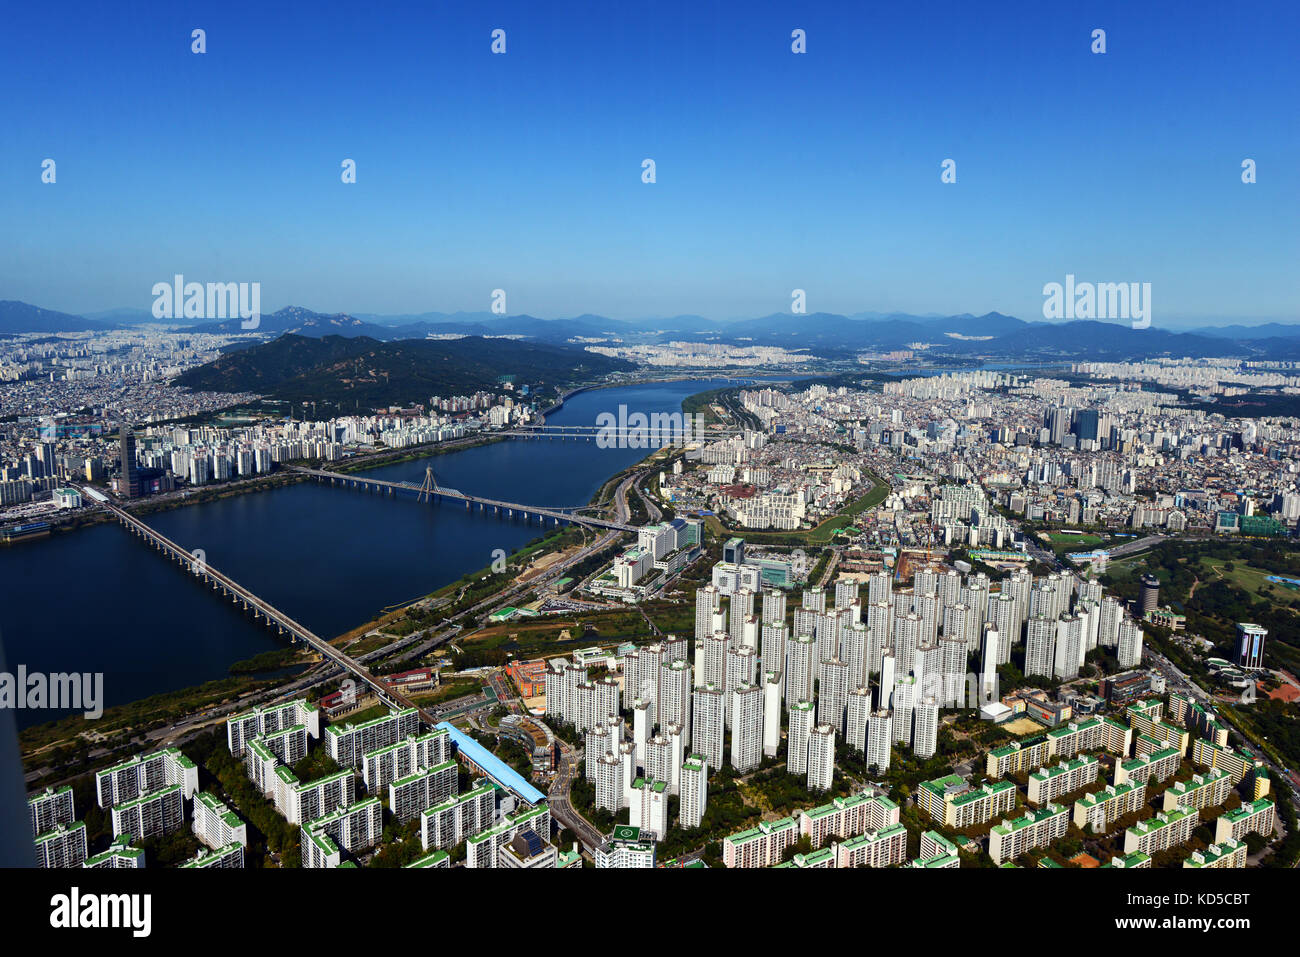 Beautiful views of Seoul from the top of the Lotte world tower. Stock Photo